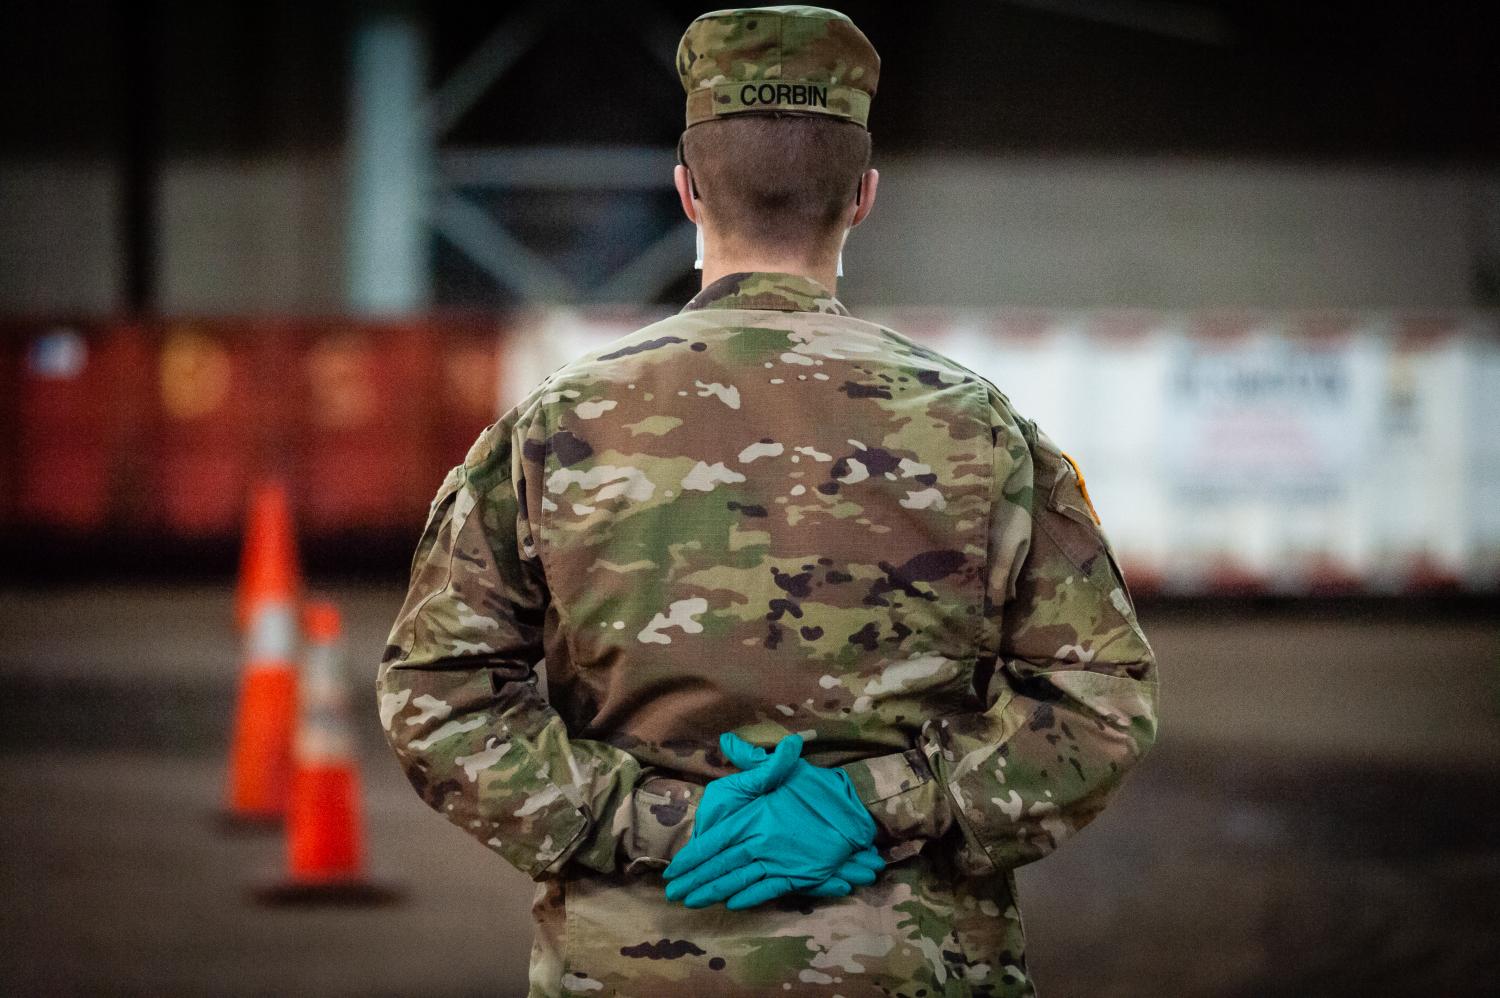 A soldier of the U.S. Army waits for the next cab driver at the Kingsbridge Armory in the Bronx on April 18, 2020.  The armory is used as a temporary food distribution center during the COVID-19 crisis and soldiers of the U.S. Army load meals into the cabs of TLC licensed drivers who deliver them to New Yorkers in need during the COVID-19 pandemic. (Photo by Gabriele Holtermann-Gorden/Sipa USA)No Use UK. No Use Germany.